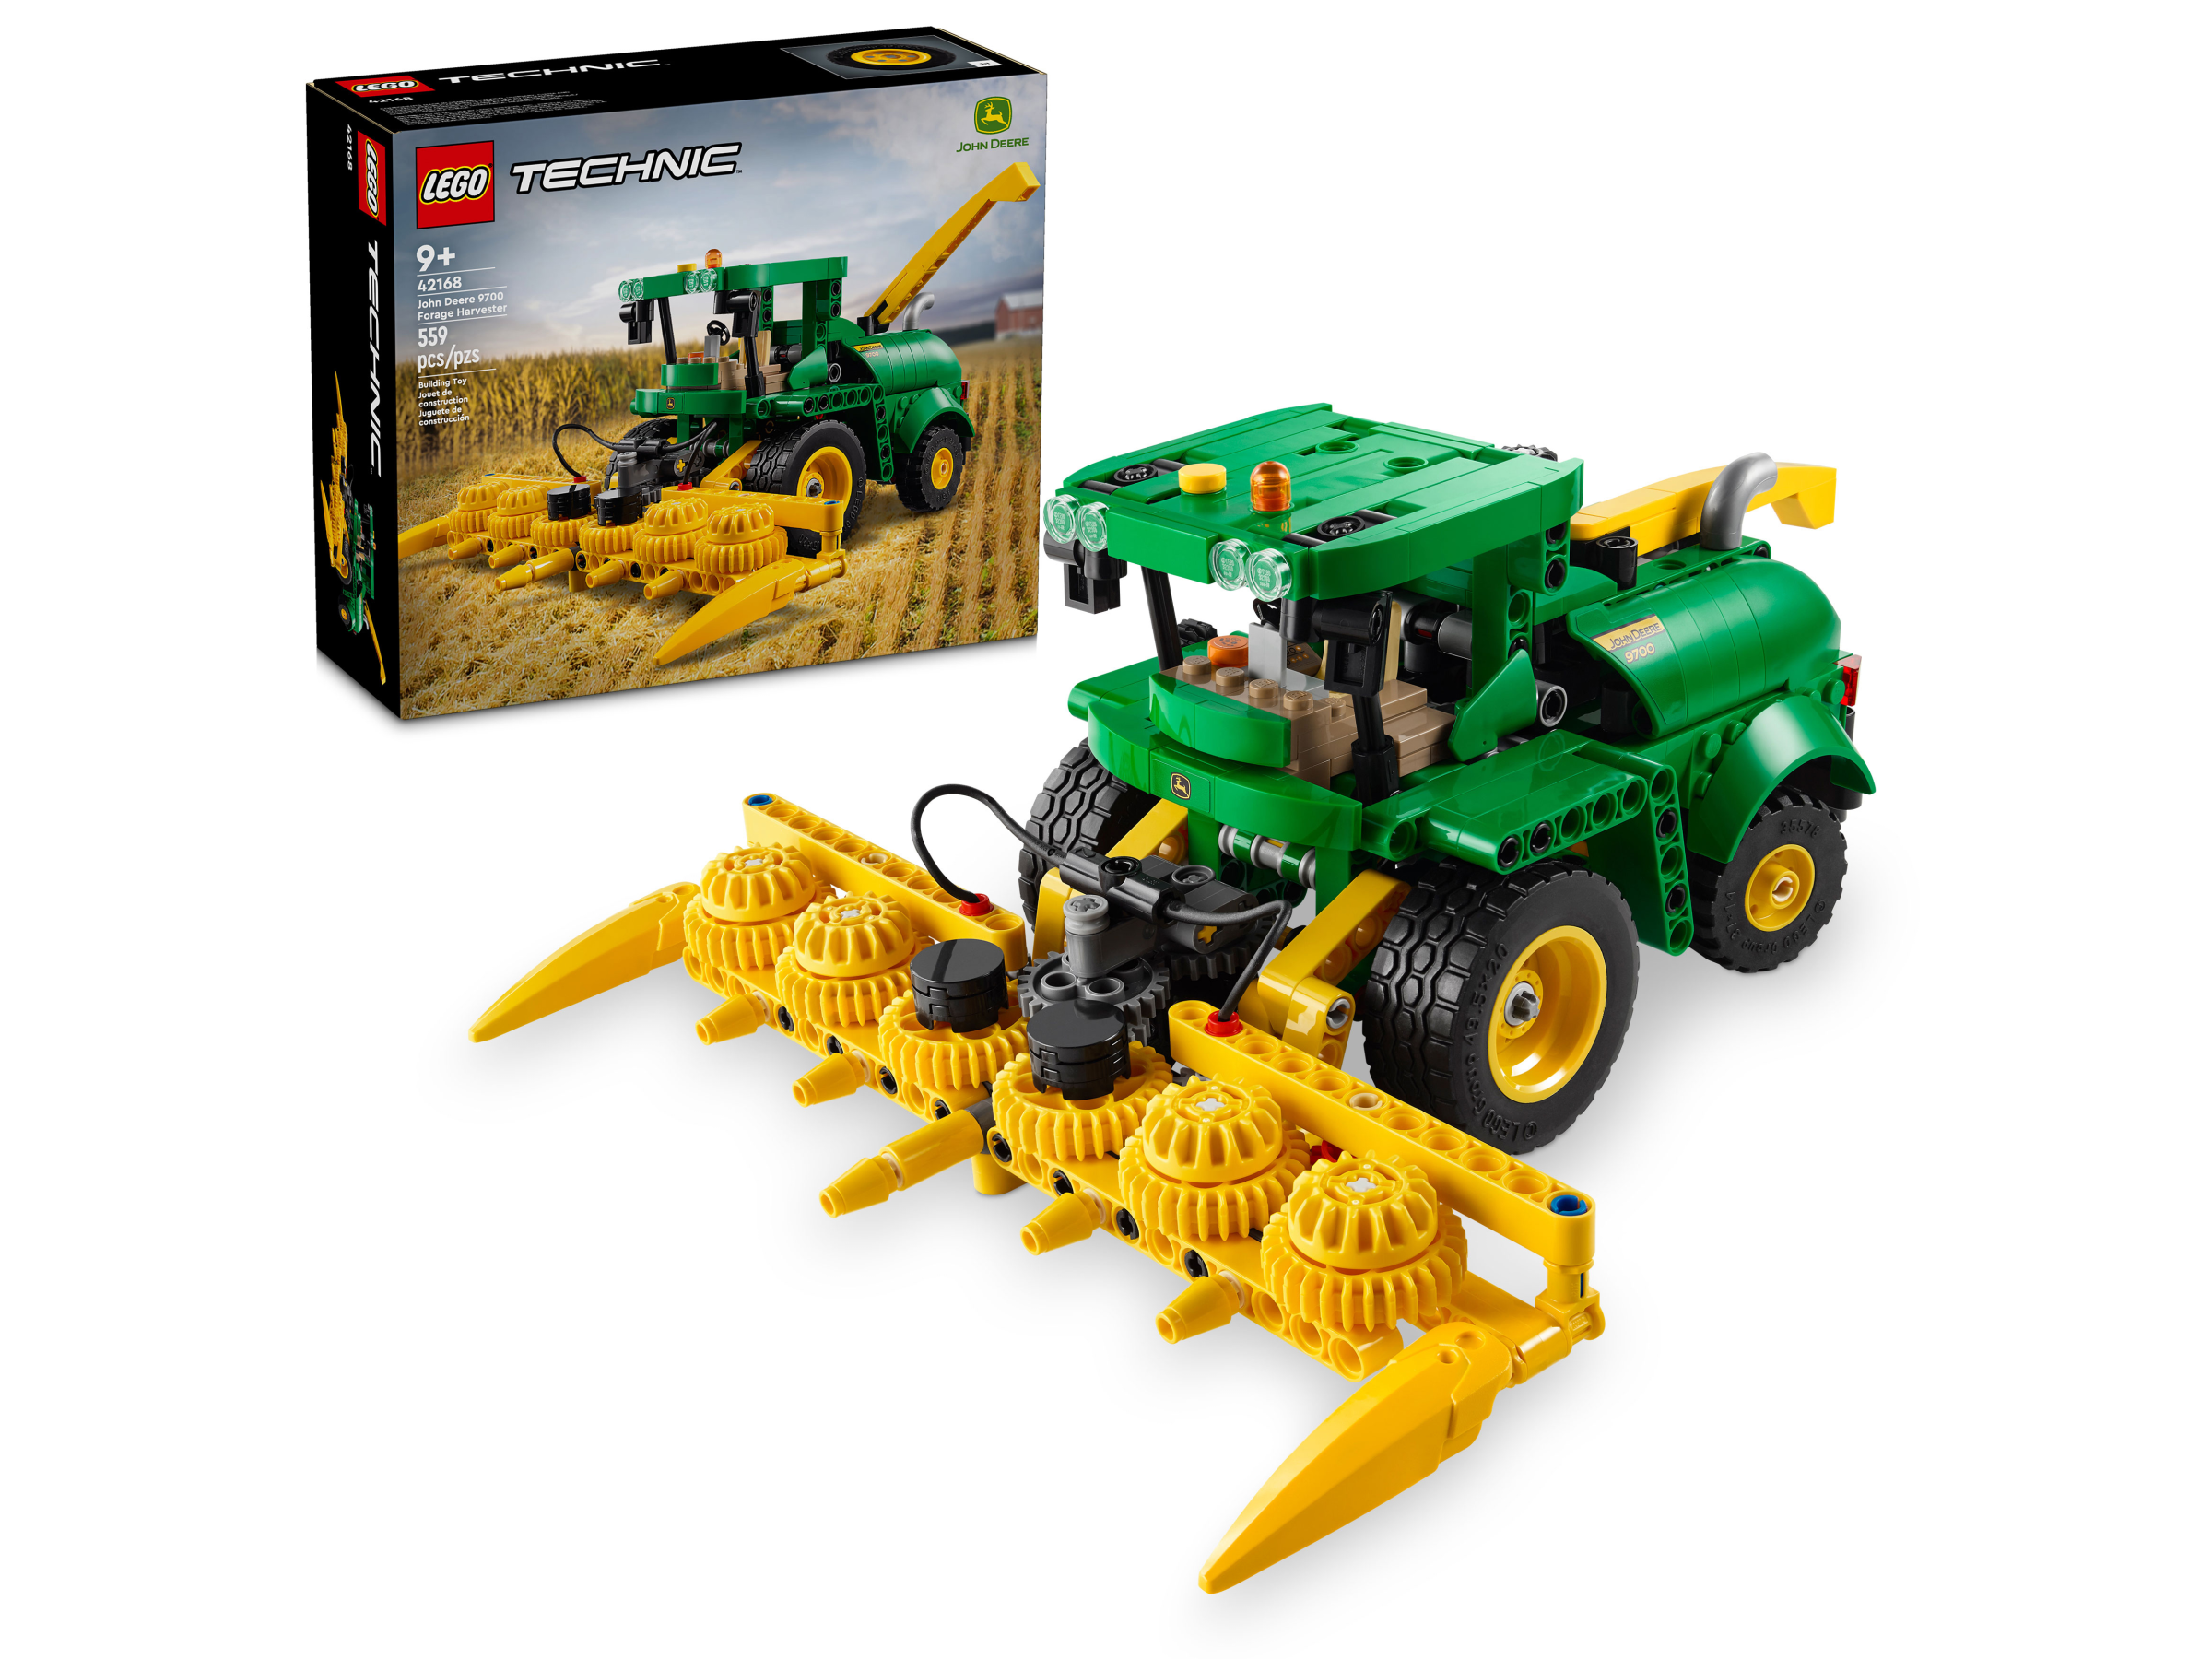 Lego Technic Toys And Sets